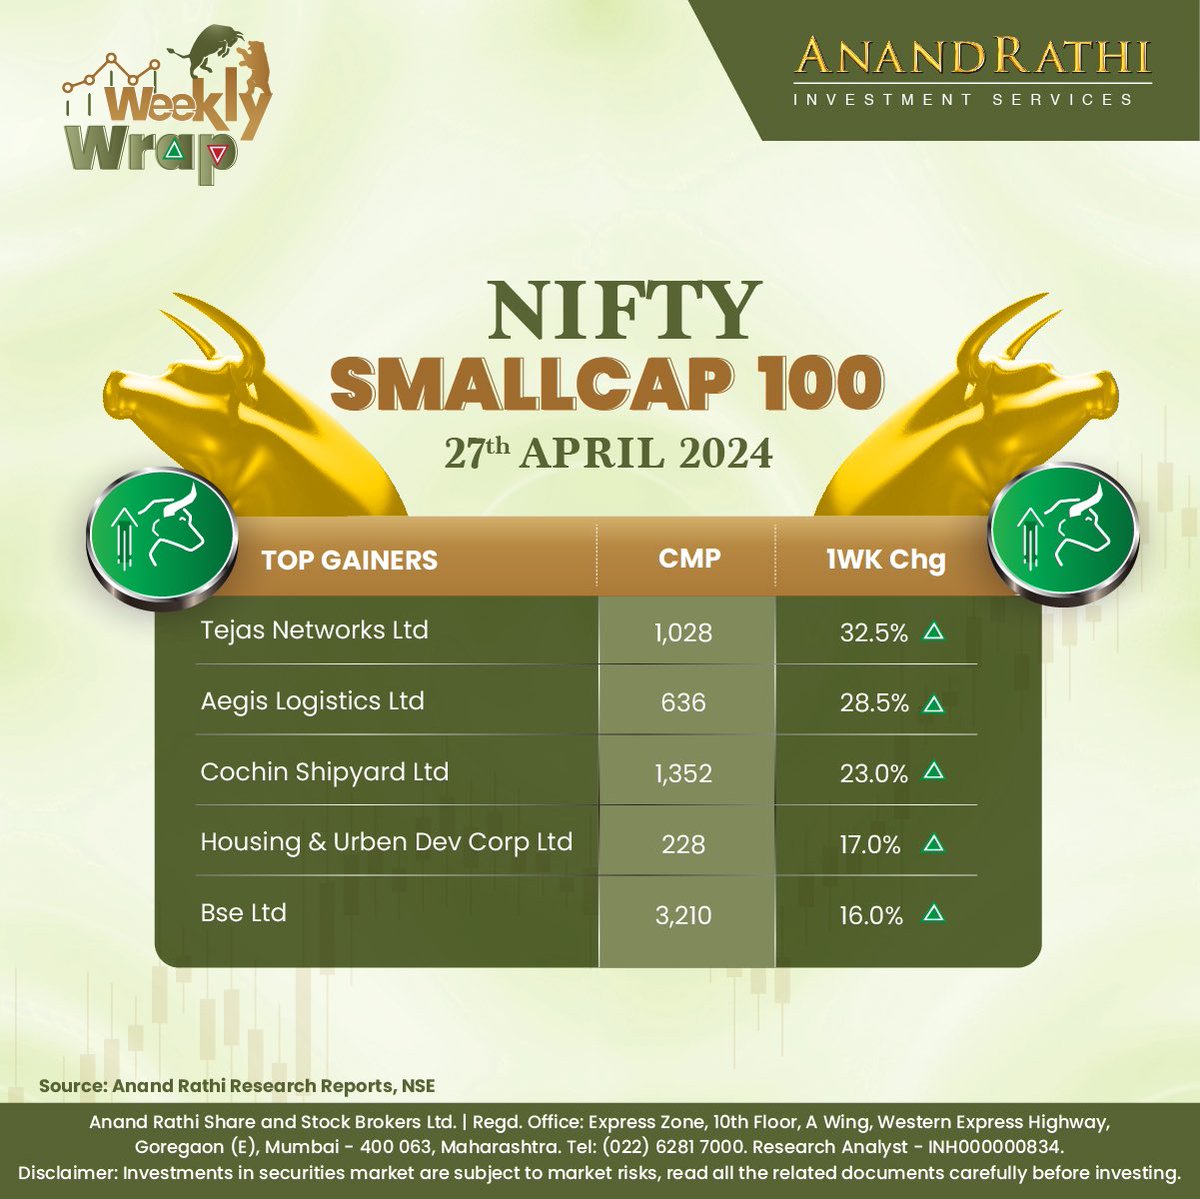 Take a glance at our Weekly Wrap - Nifty Smallcap 100

Disclaimer - bit.ly/ARDisclaimerRe…

#WeeklyWrap #anandrathi #stockbroker #stockmarket #commodities #currencies #international #nifty #sensex